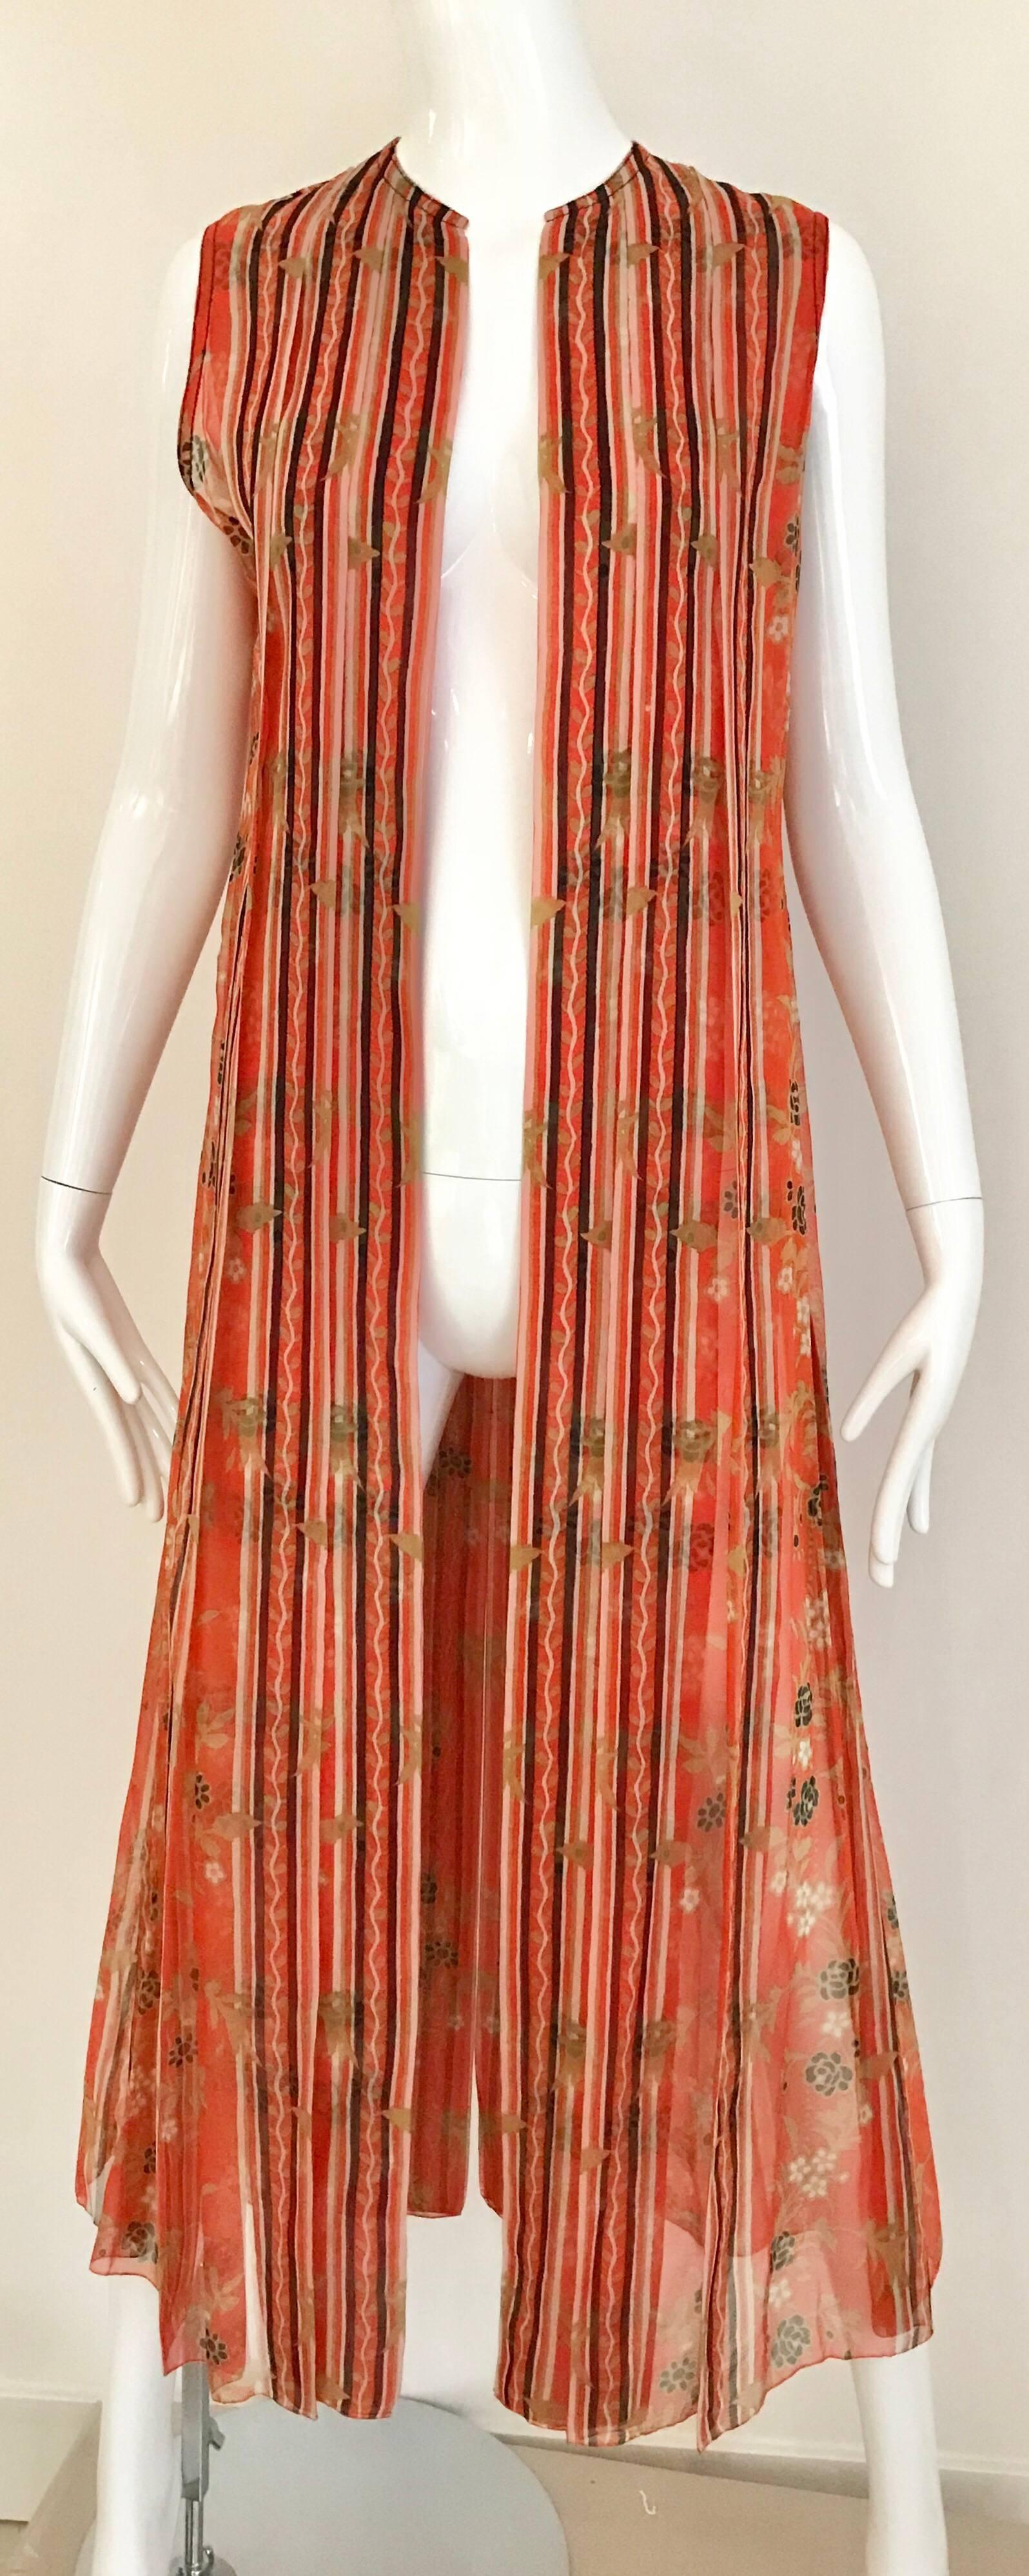 1970s GALANOS Orange and Black Floral Silk Print Dress with Vest  In Good Condition For Sale In Beverly Hills, CA